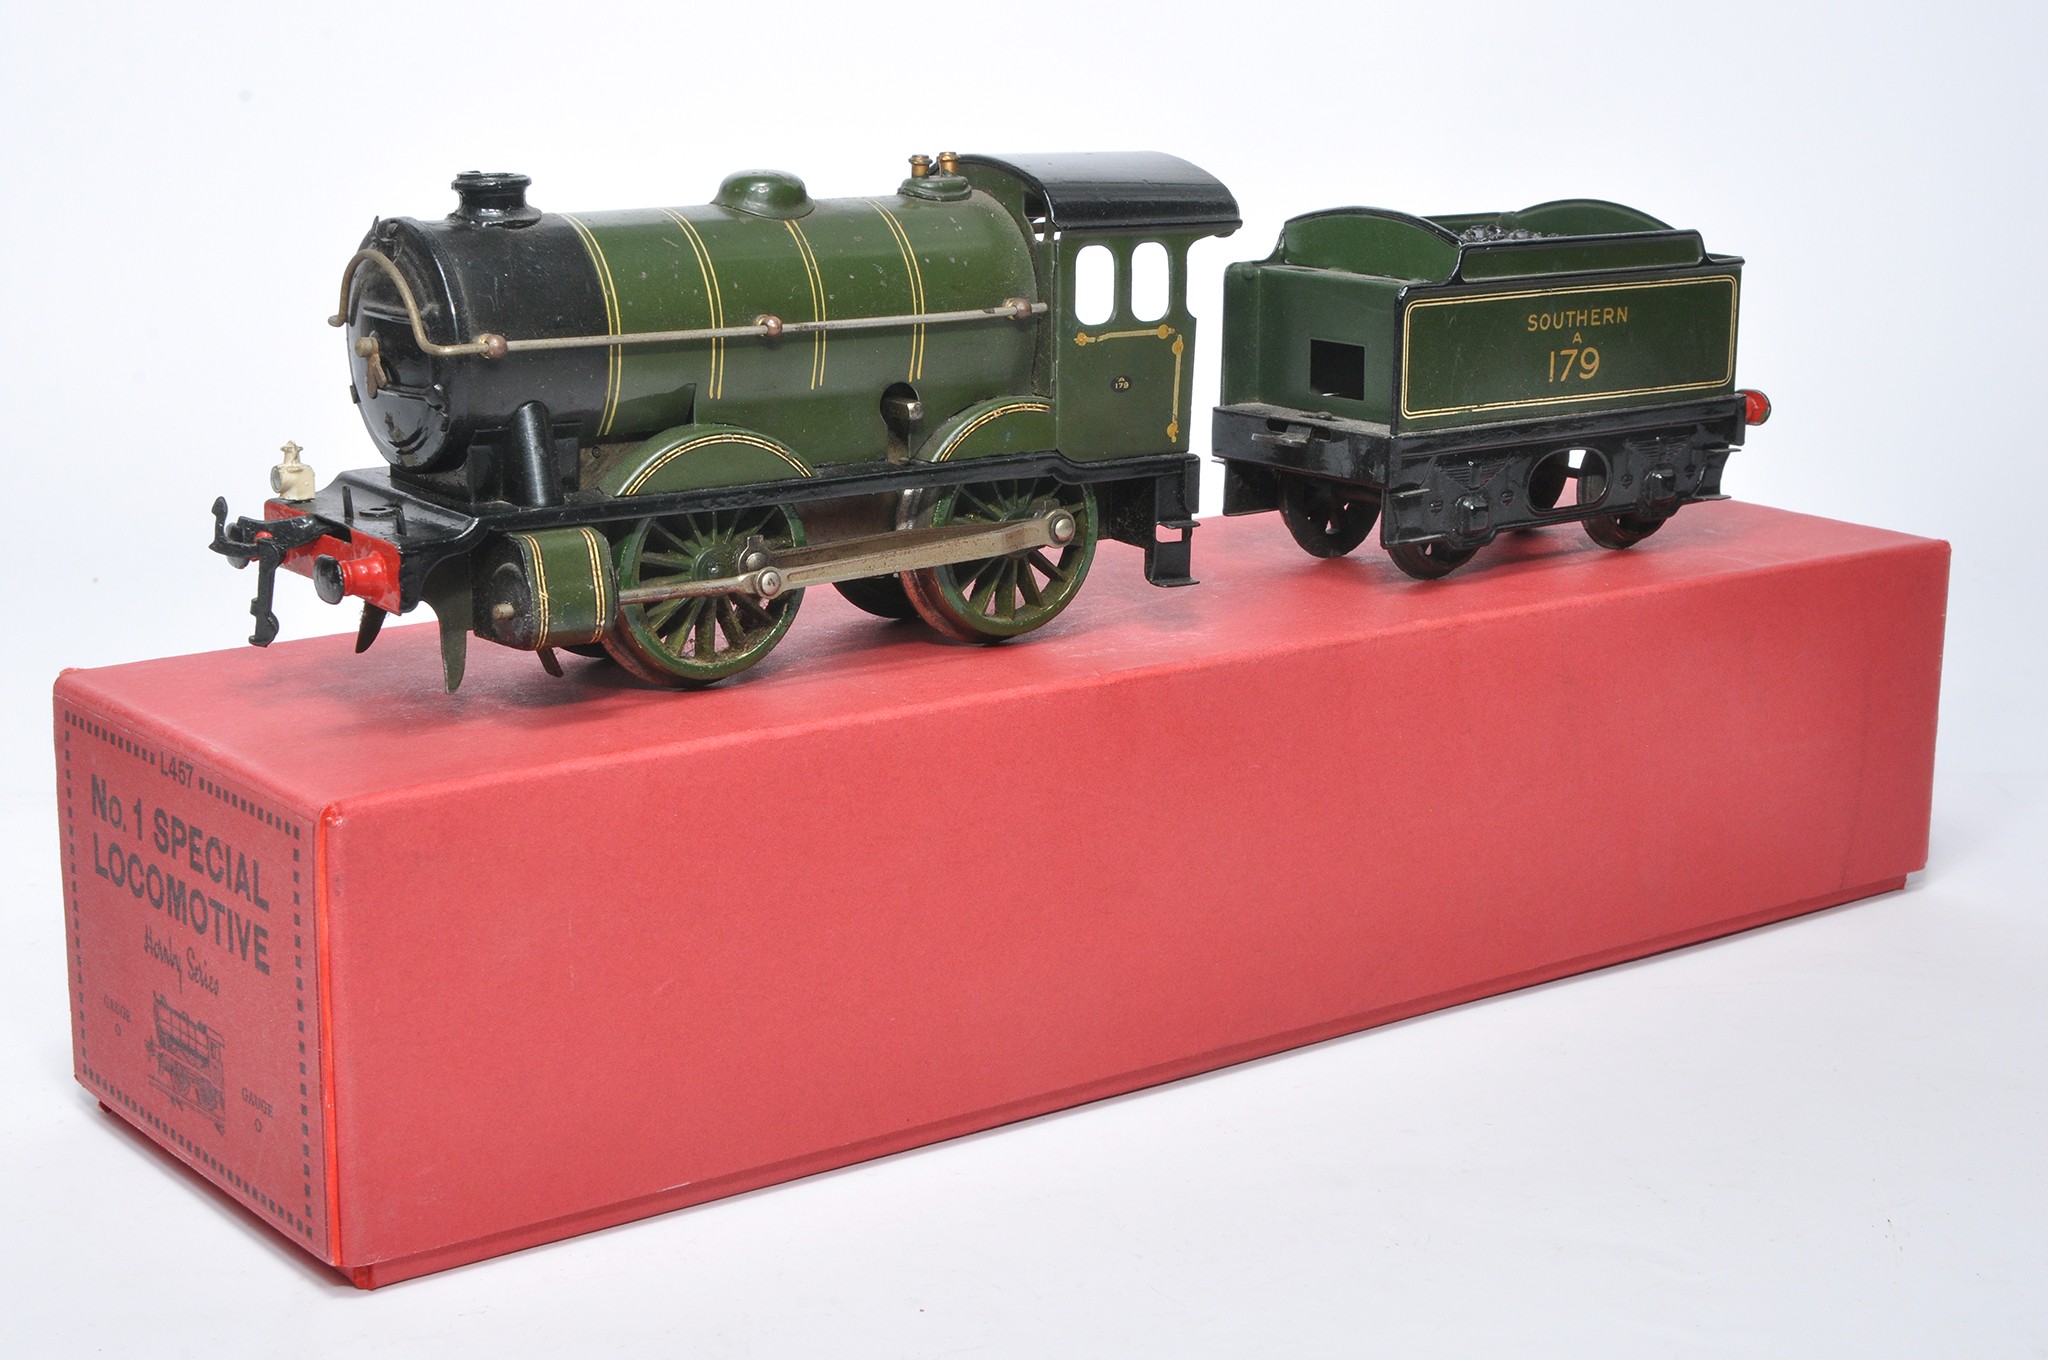 Hornby O Gauge Model Railway comprising No. 1 Special Locomotive, Southern 179 with tender. Displays